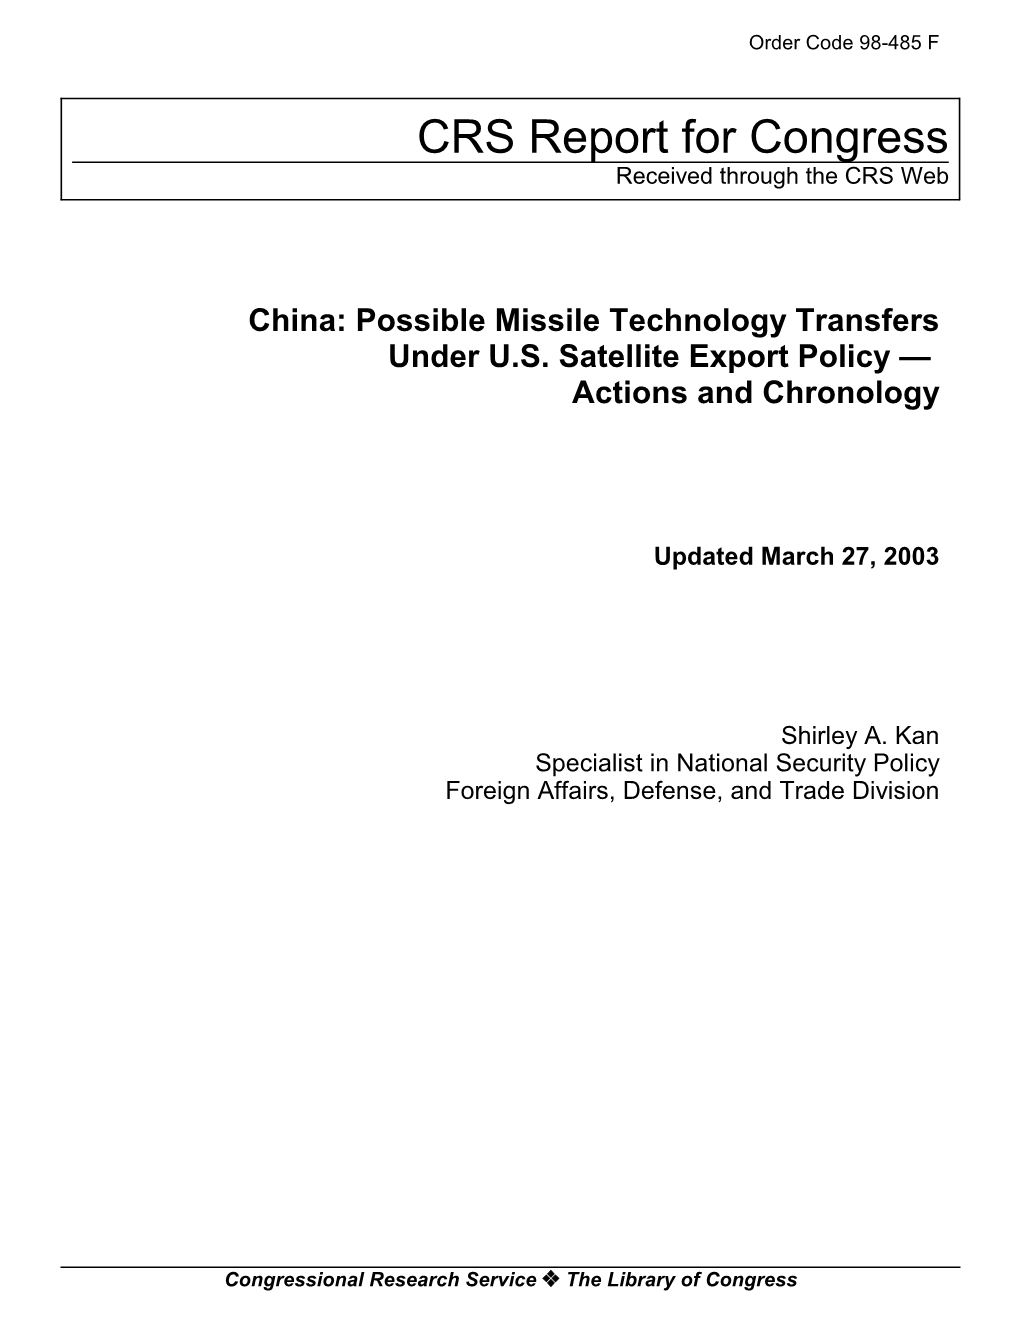 Possible Missile Technology Transfers Under US Satellite Export Policy Actions and Chronology